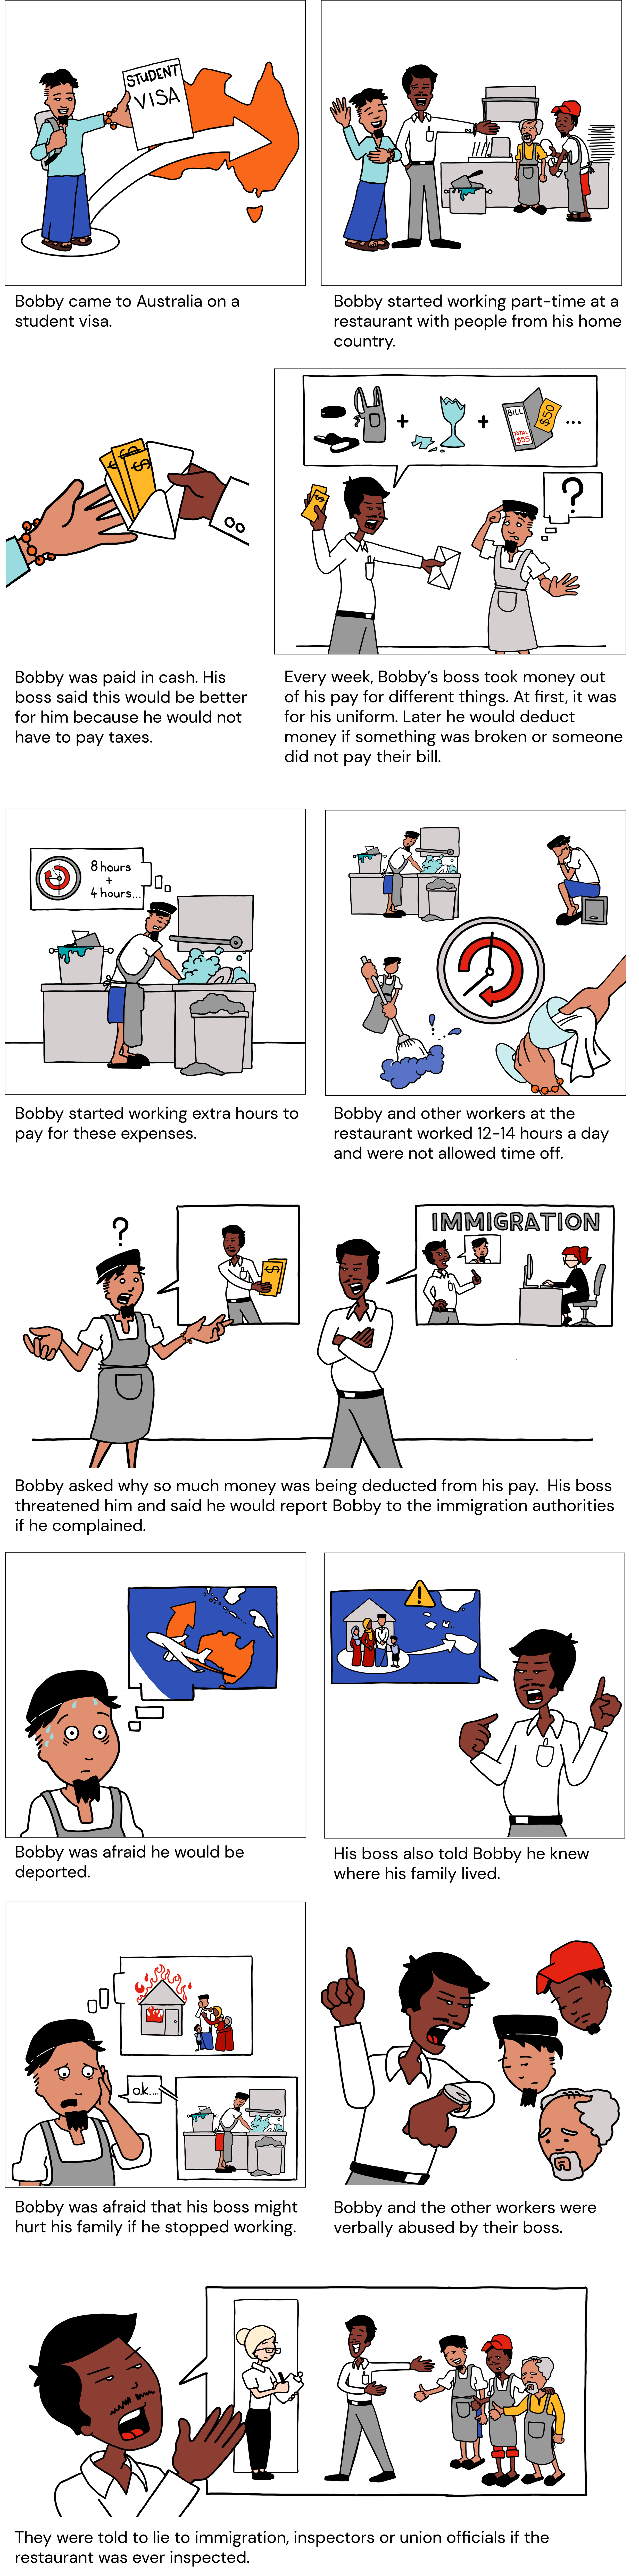 230206_Bobby_Forced Labour_FINAL_v2.png